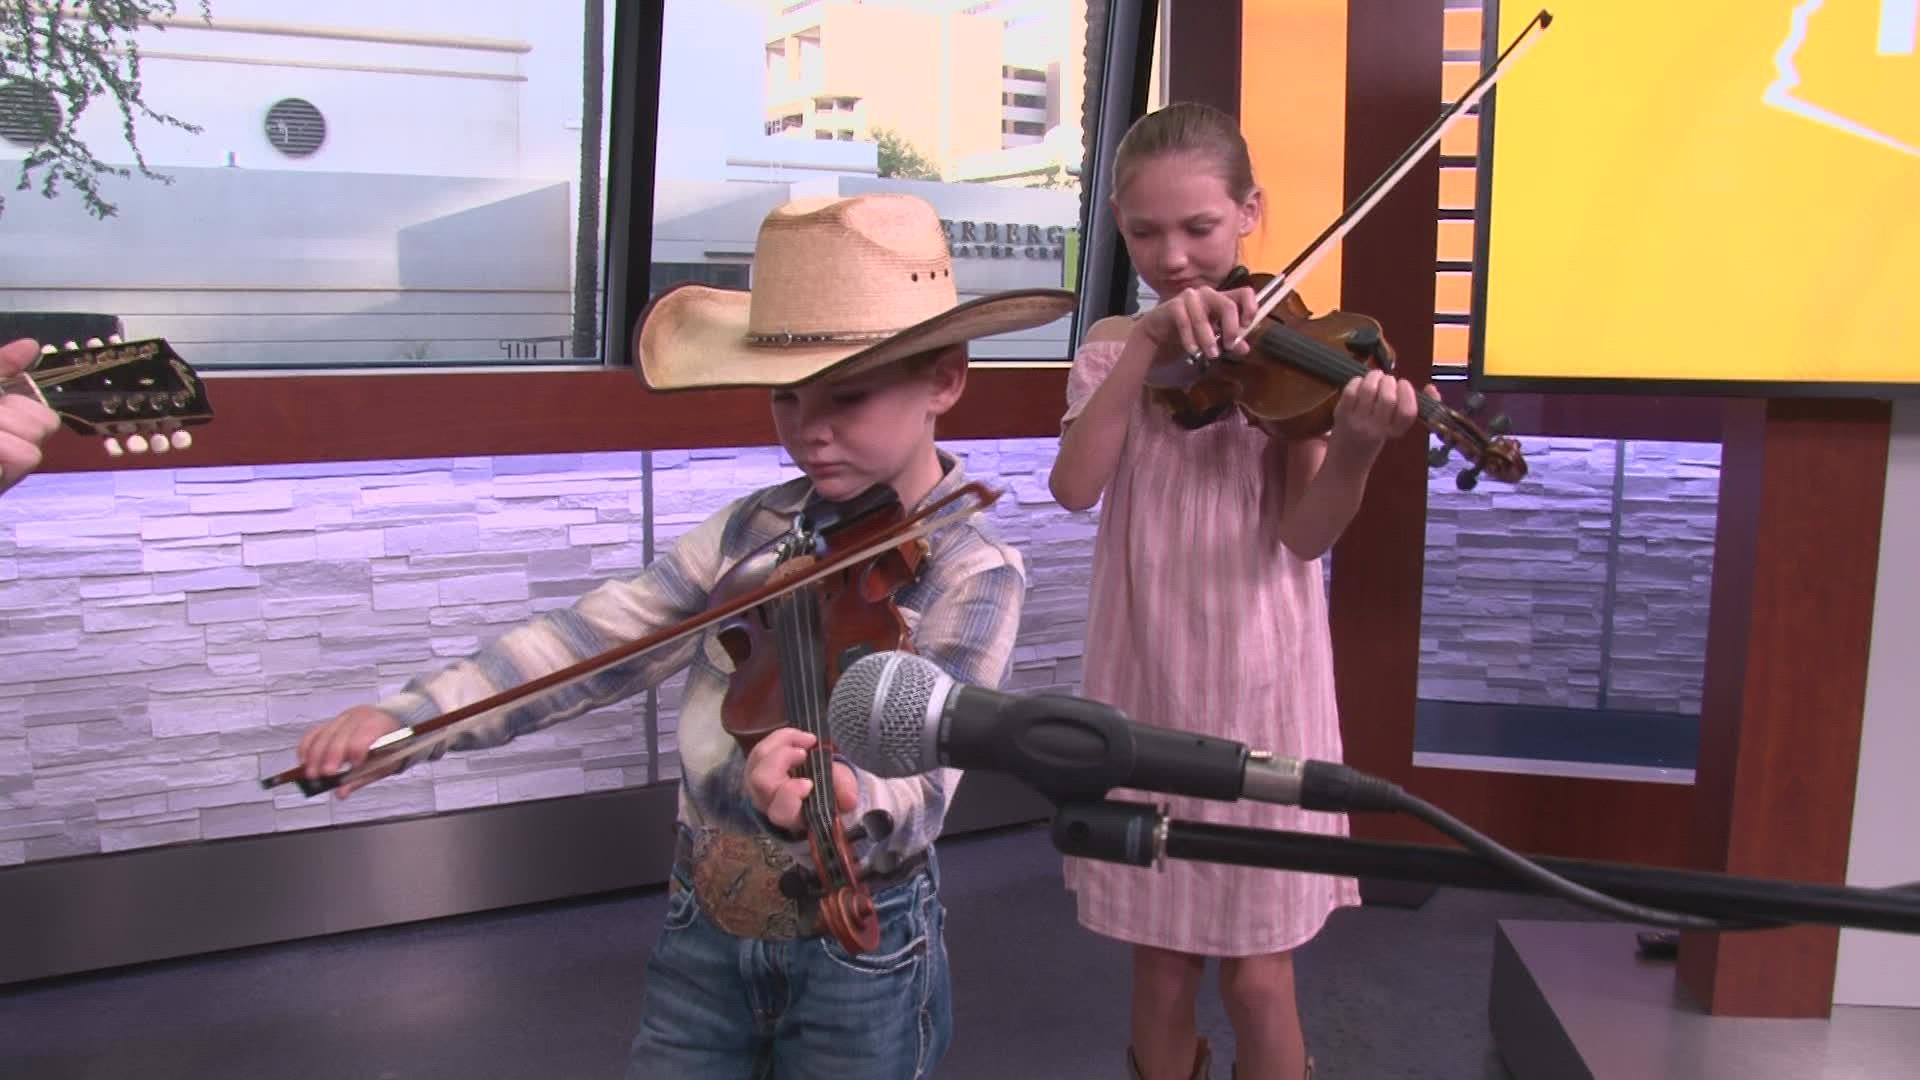 Sawyer won the Arizona State Fiddle Championship for Small-Fry in both 2020 and 2021 in Payson.